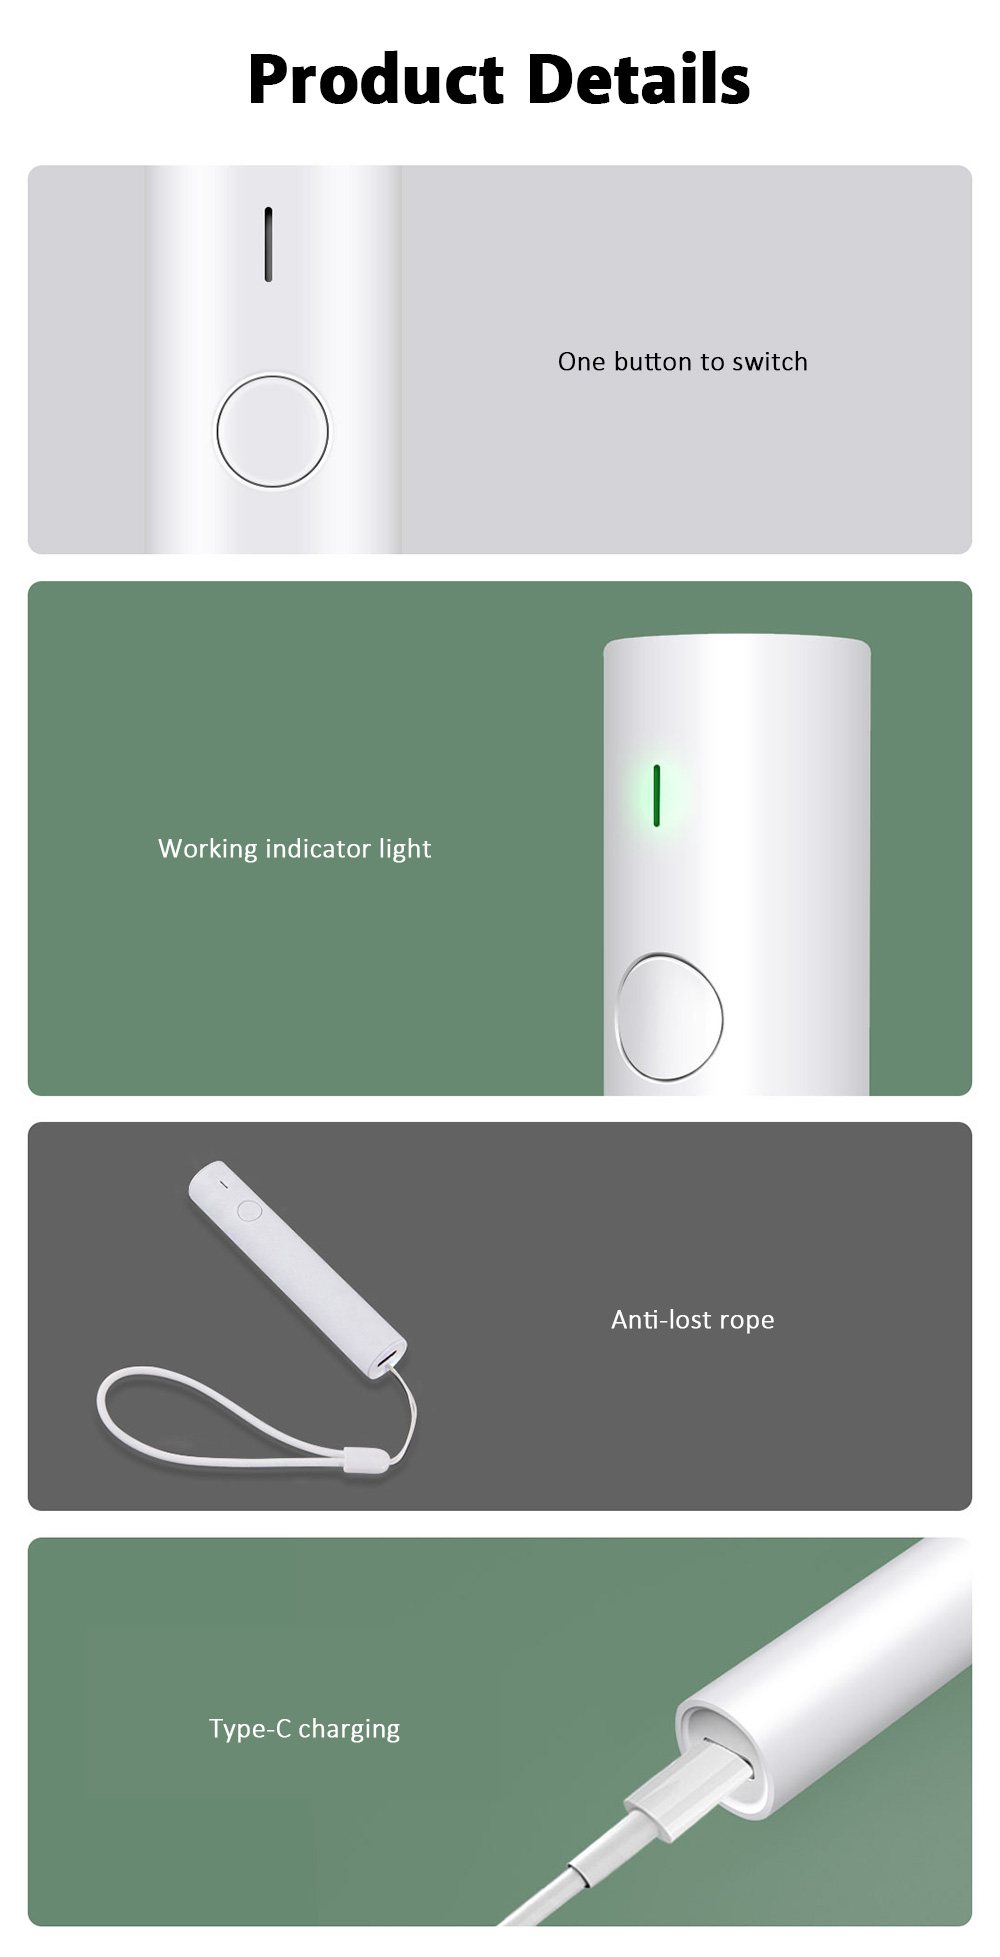 Small and Portable Infrared Pulse Antipruritic Stick Precise Temperature Control 200mAh Battery from Xiaomi Youpin